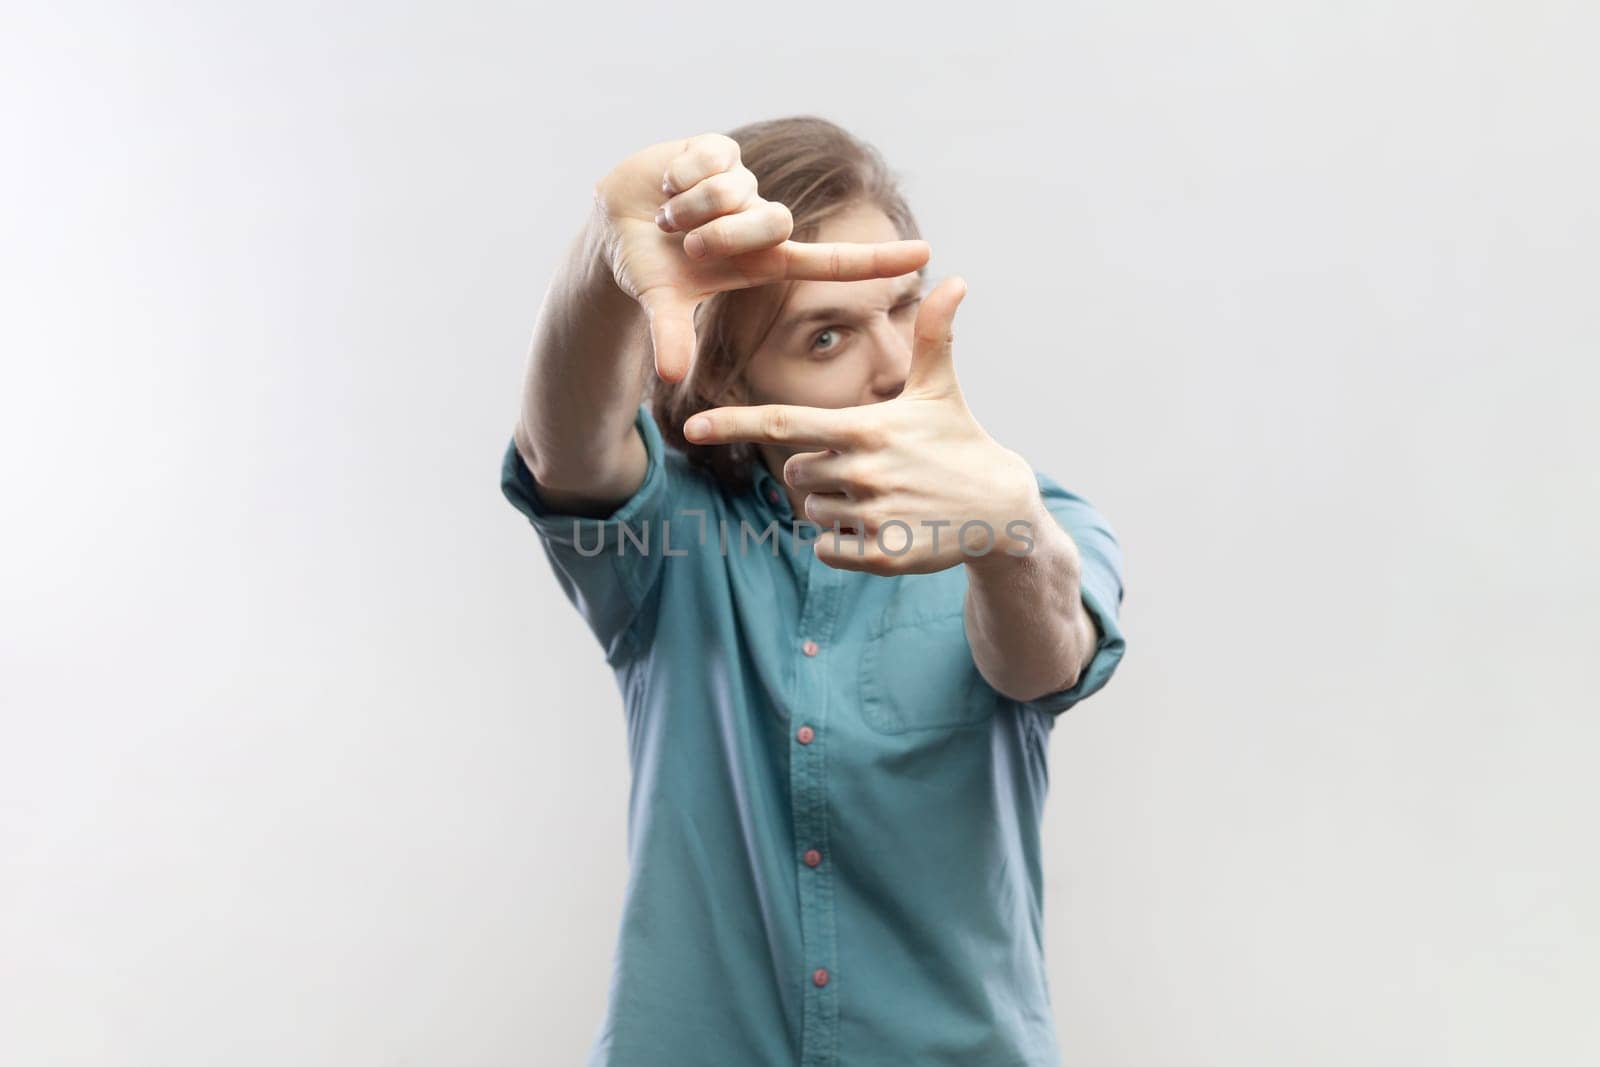 Portrait of man looking through frame of fingers gesturing photo, zooming focusing to camera, observing with serious expression, wearing blue shirt. Indoor studio shot isolated on gray background.